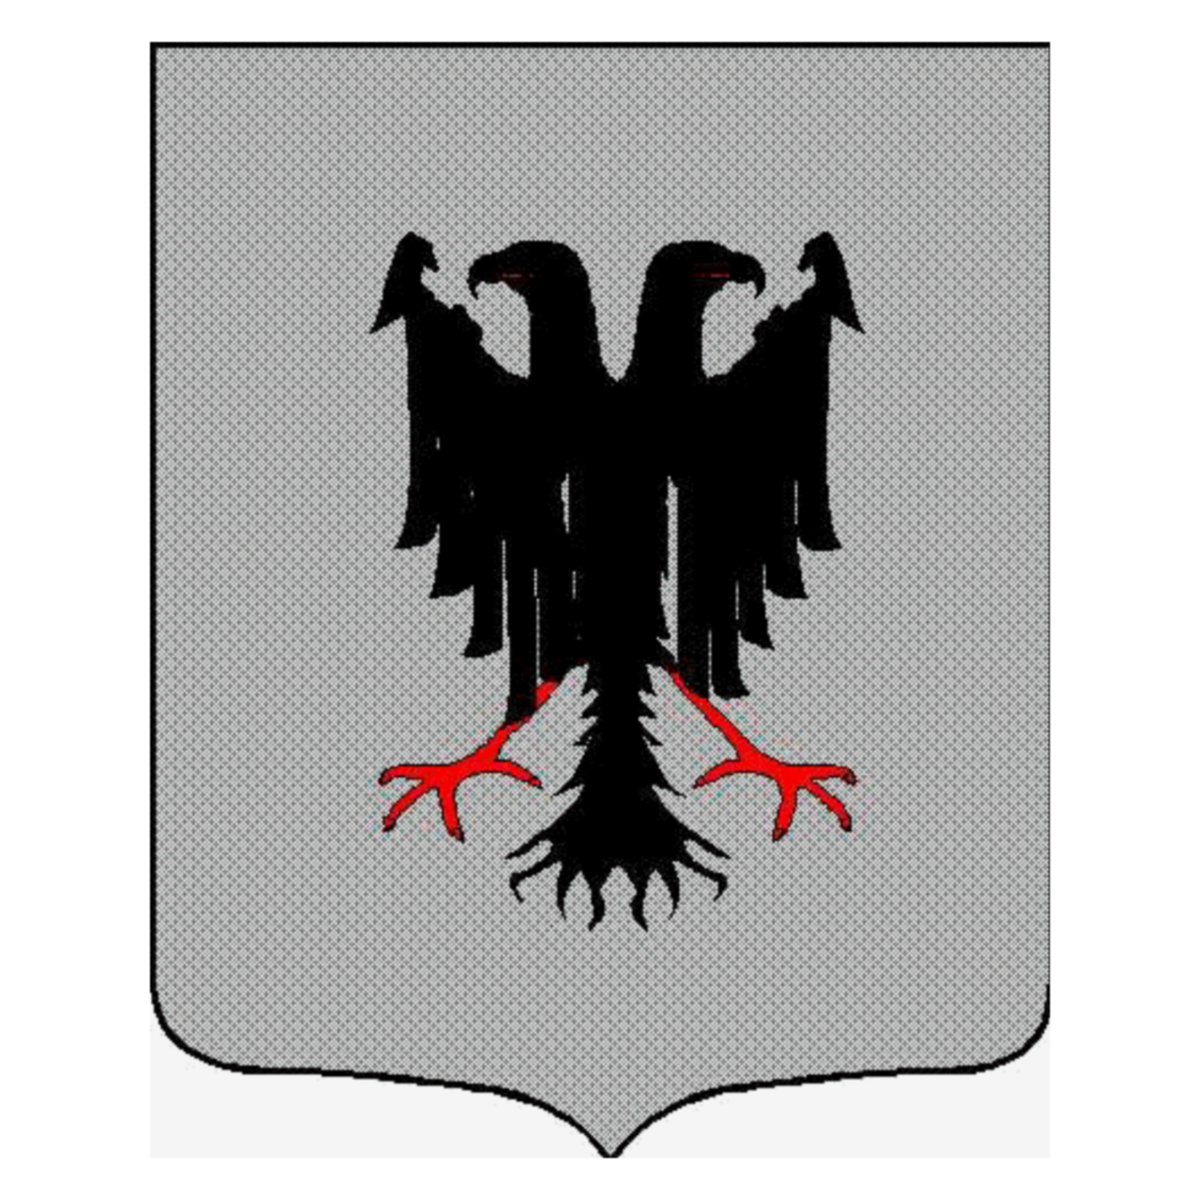 Coat of arms of family Romani